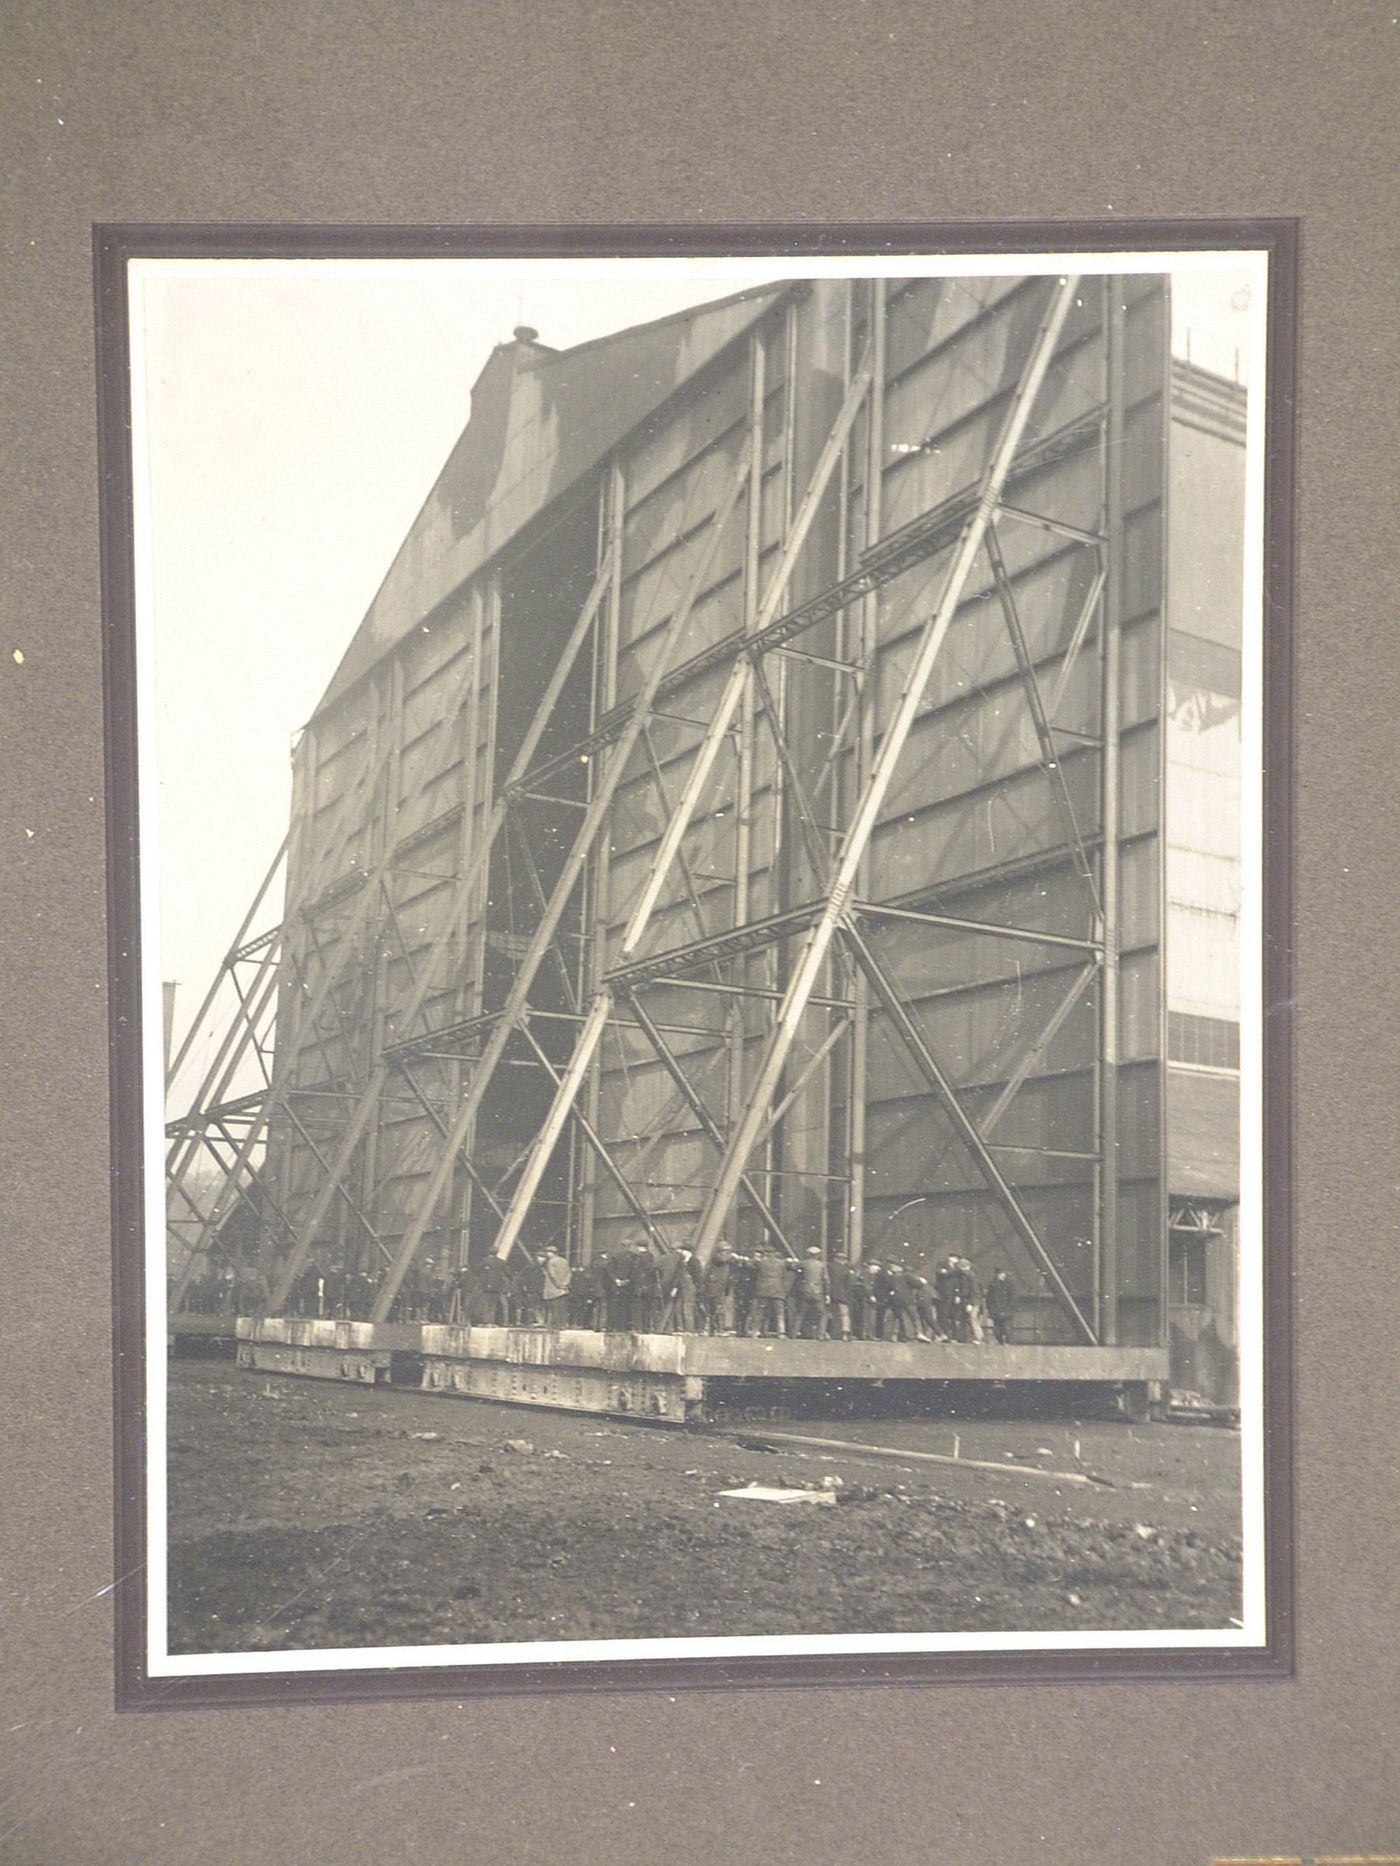 Exterior view of a group of people outside an airship hangar, United Kingdom